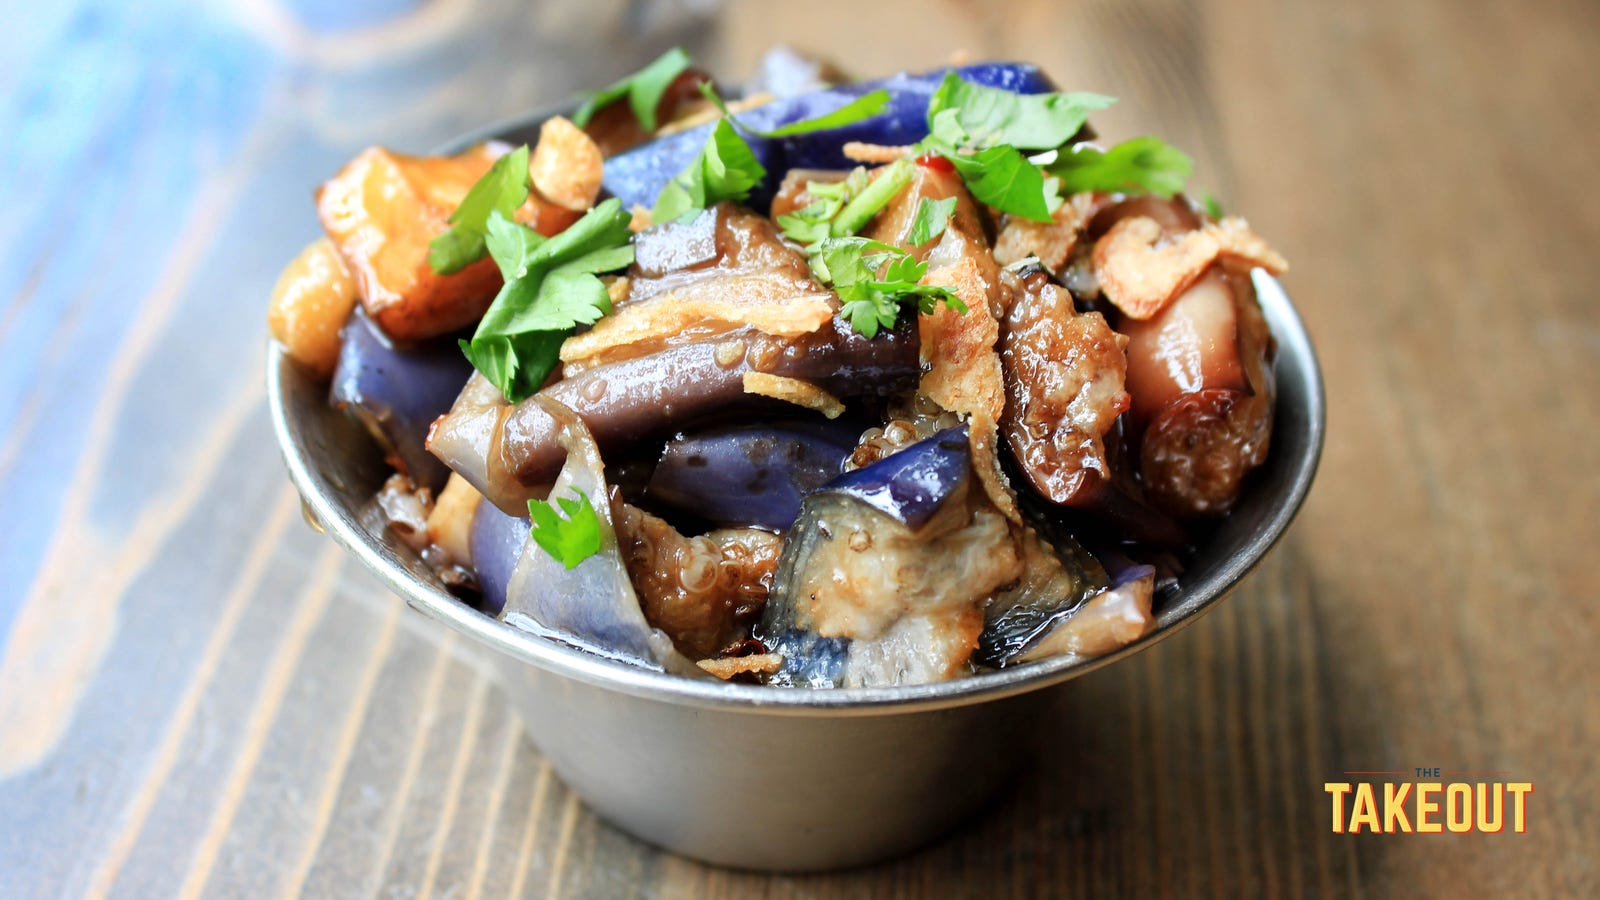 Marinated Chinese Eggplant Is The Only Recipe Ive Ever Begged From A Chef